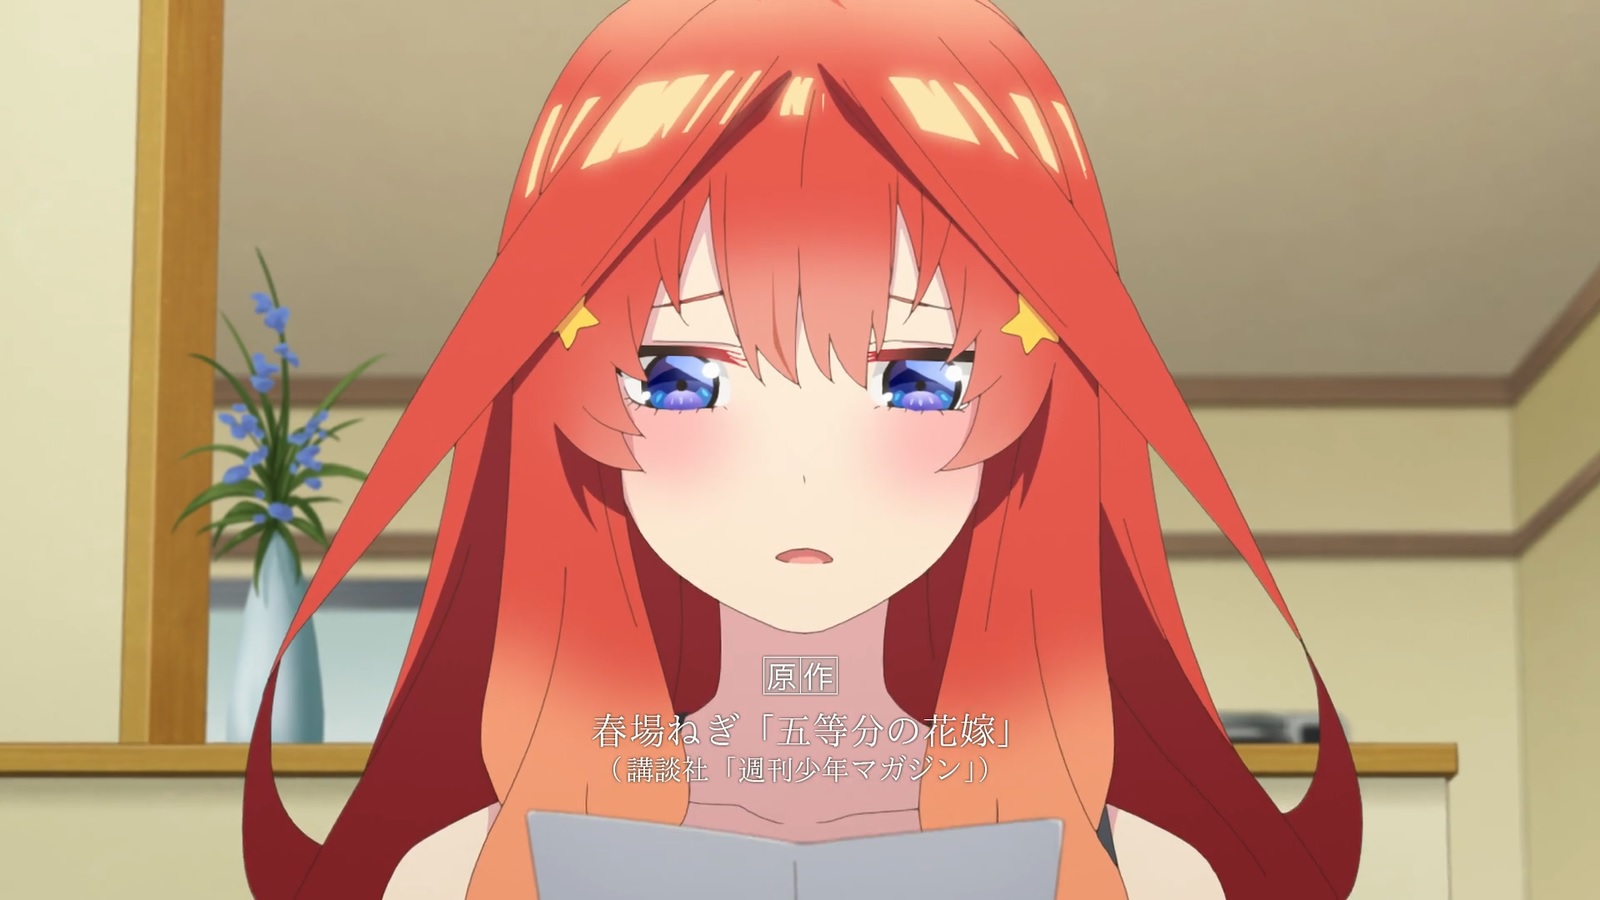 Catching All the Skipped Content from Episode 5 of Go-toubun no Hanayome ∬